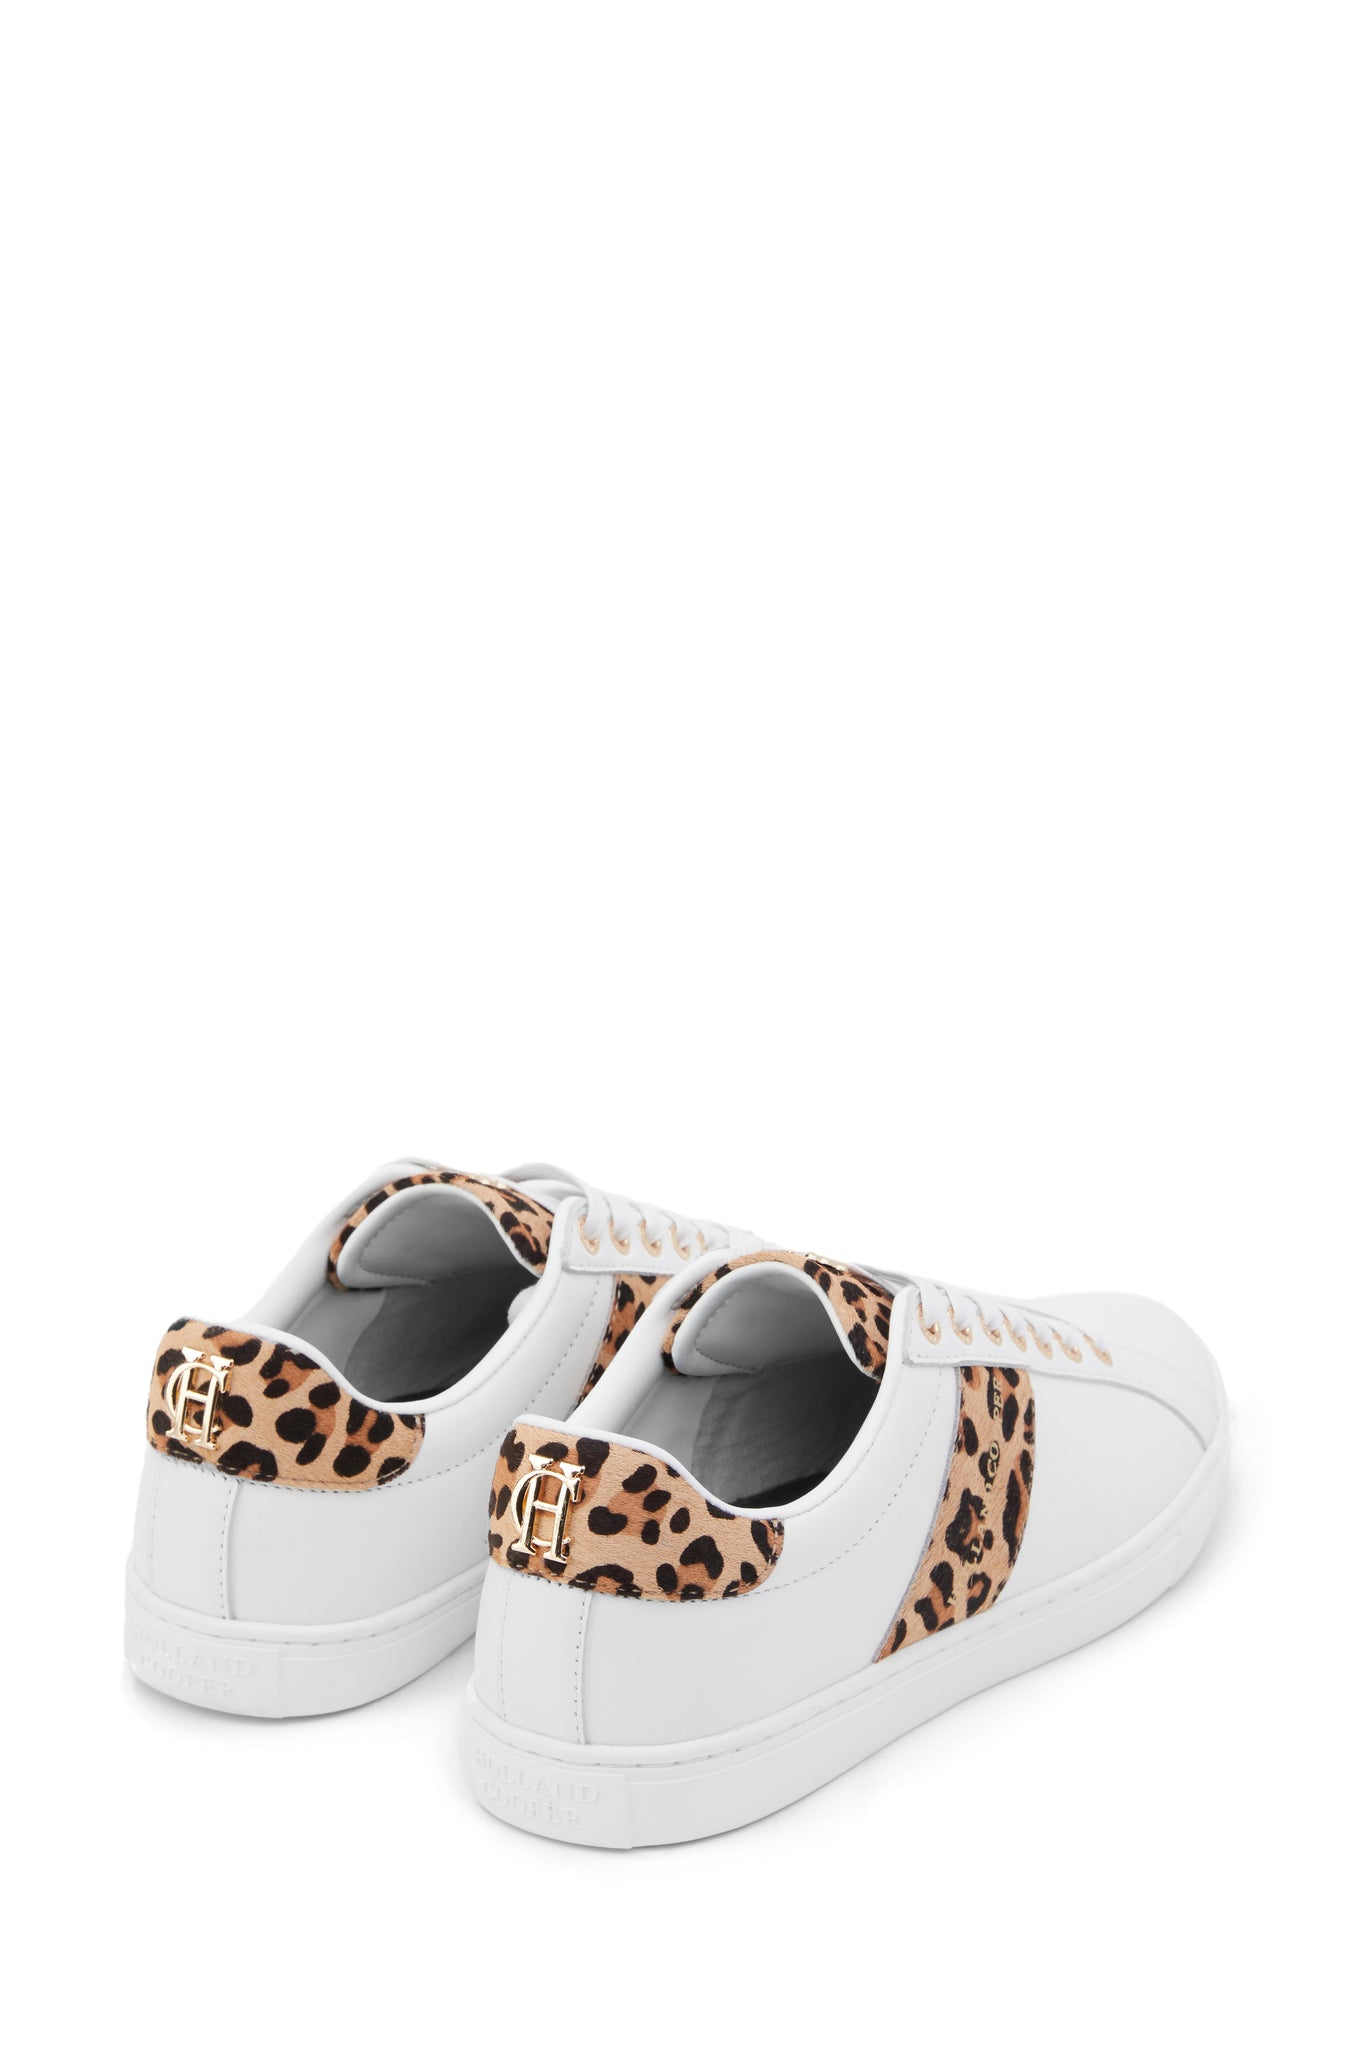 Back of white leather trainers with white laces detailed with a diagonal stripe of leopard print on the side with gold foil branding and a leopard print heel and tongue with gold hardware